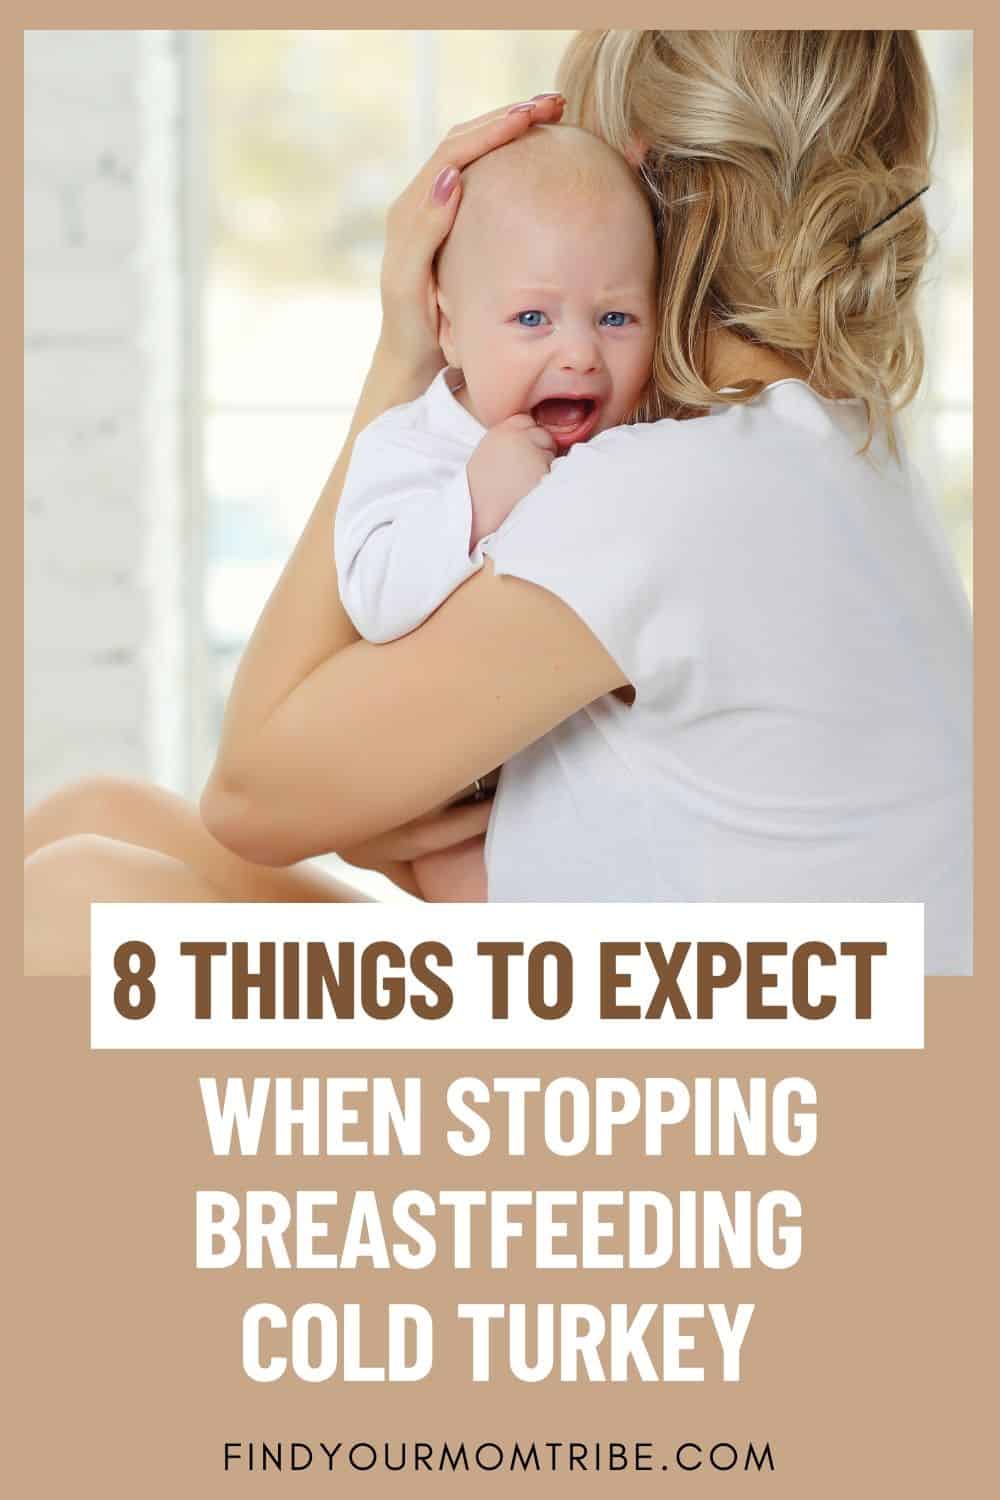 Pinterest 8 Things To Expect When Stopping Breastfeeding Cold Turkey